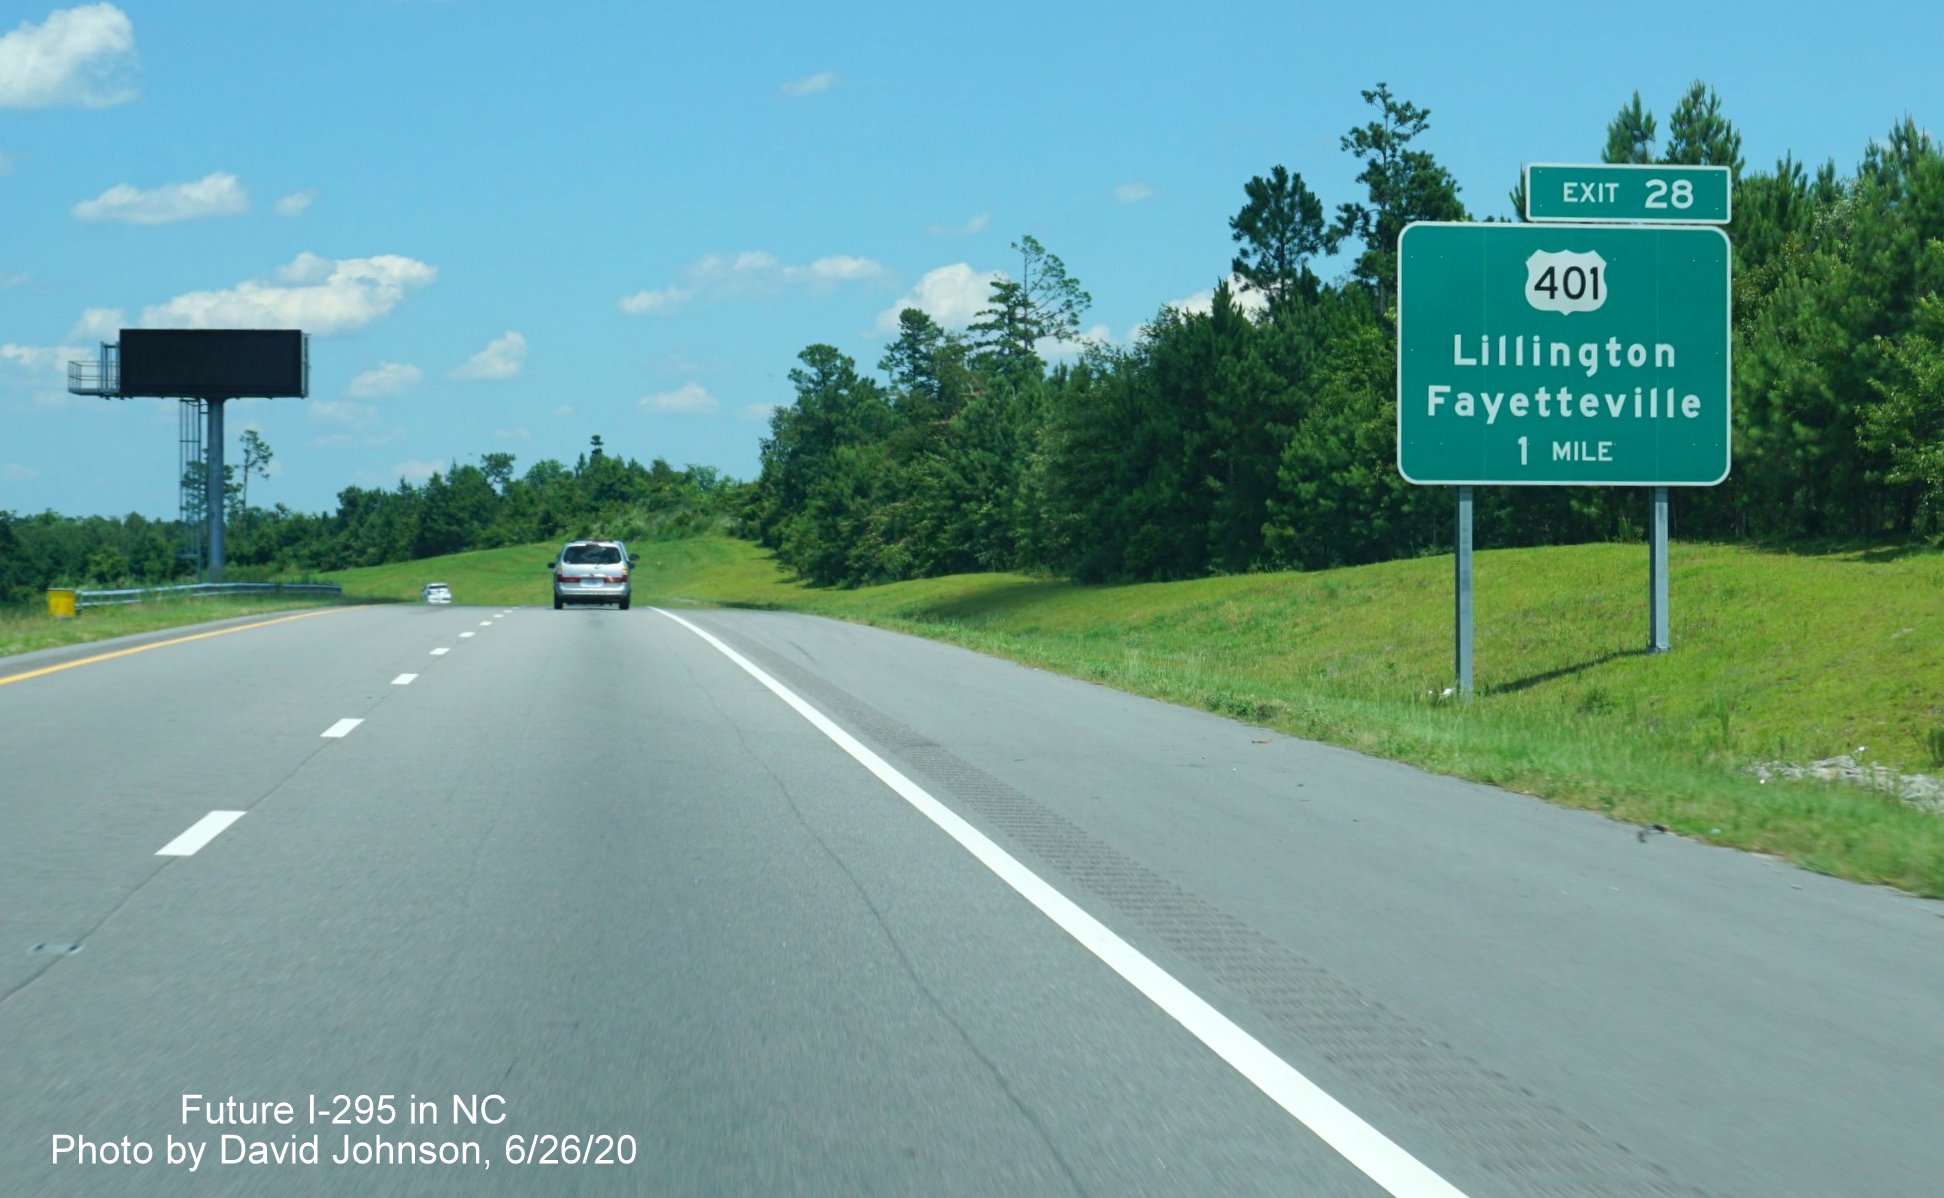 Image of the 1-Mile advance sign for the US 401 exit on I-295 North in Fayetteville, by David Johnson June 2020